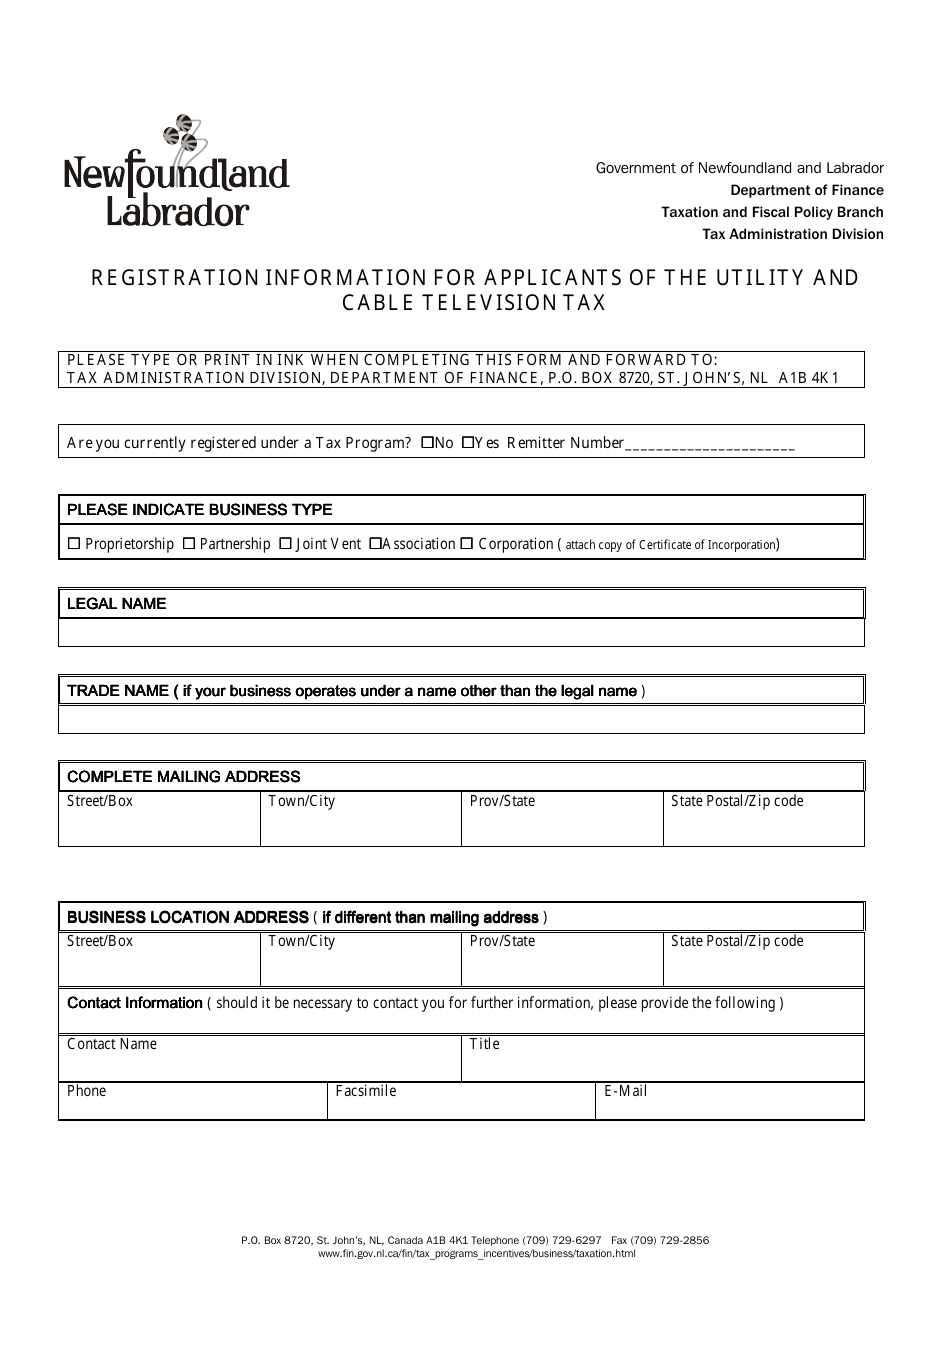 Registration Information for Applicants of the Utility and Cable Television Tax - Newfoundland and Labrador, Canada, Page 1